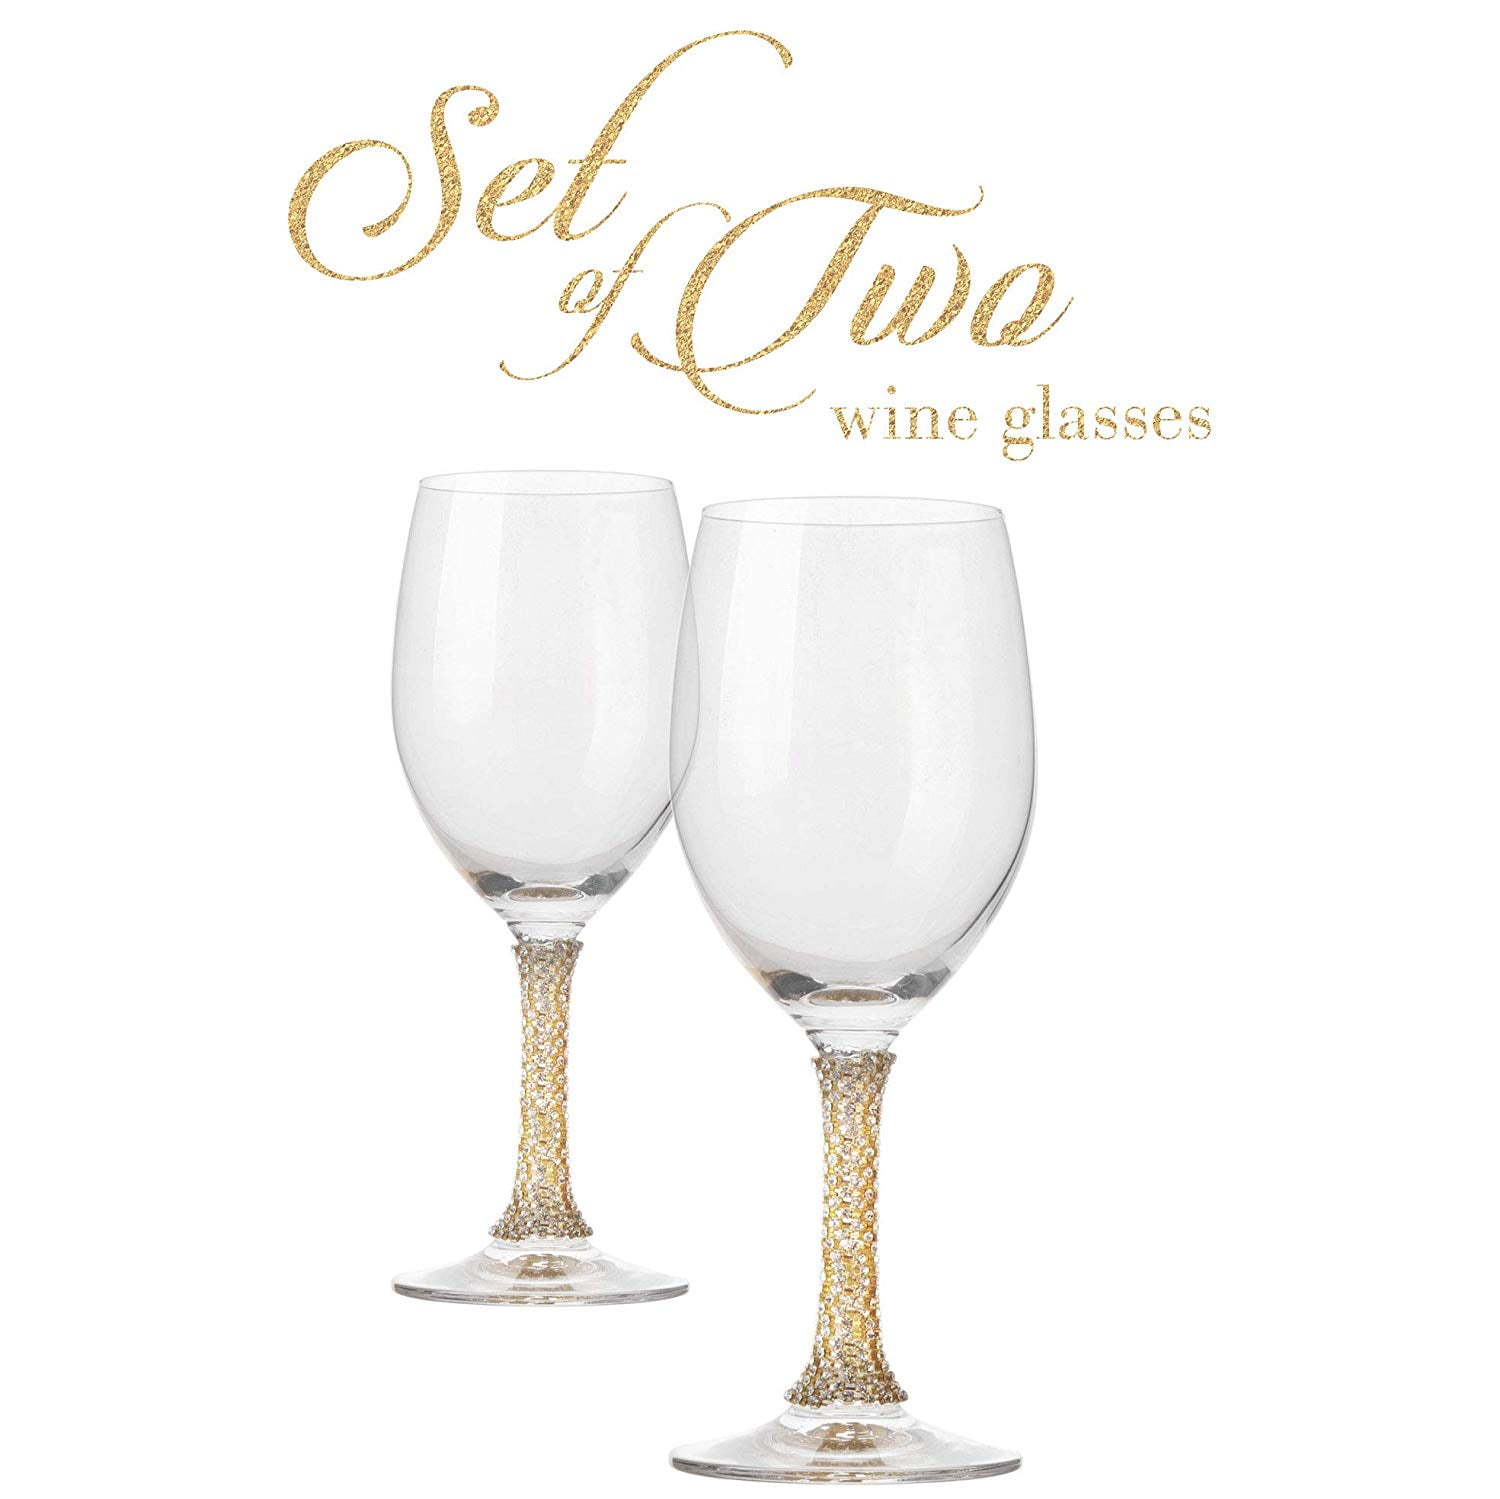 For Medicinal Purposes Only Stemless Wine Glass Set of 2 17 oz 4 1/2 Inch